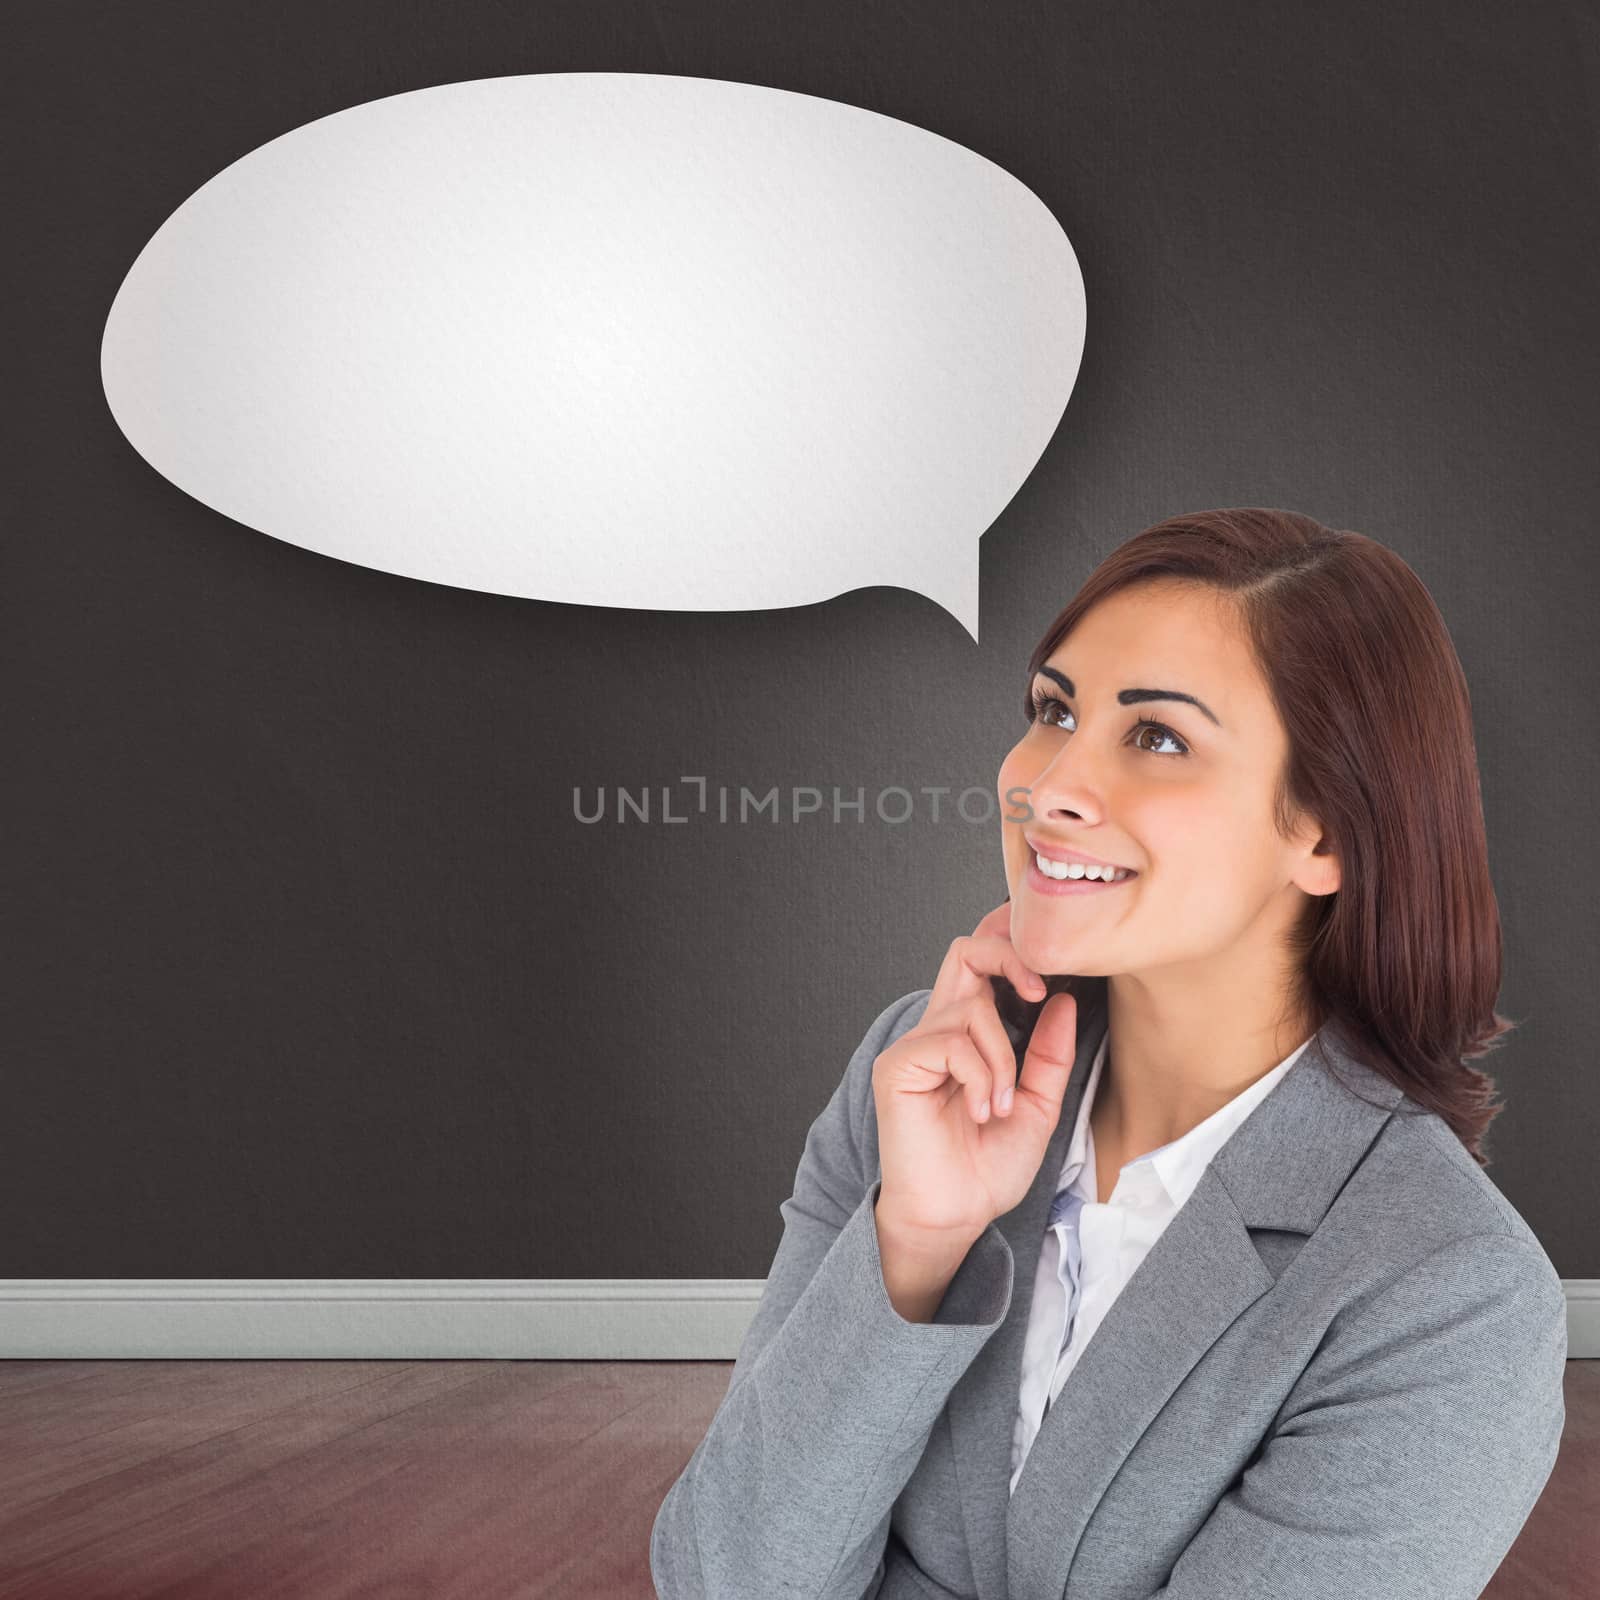 Smiling thoughtful businesswoman against speech bubble